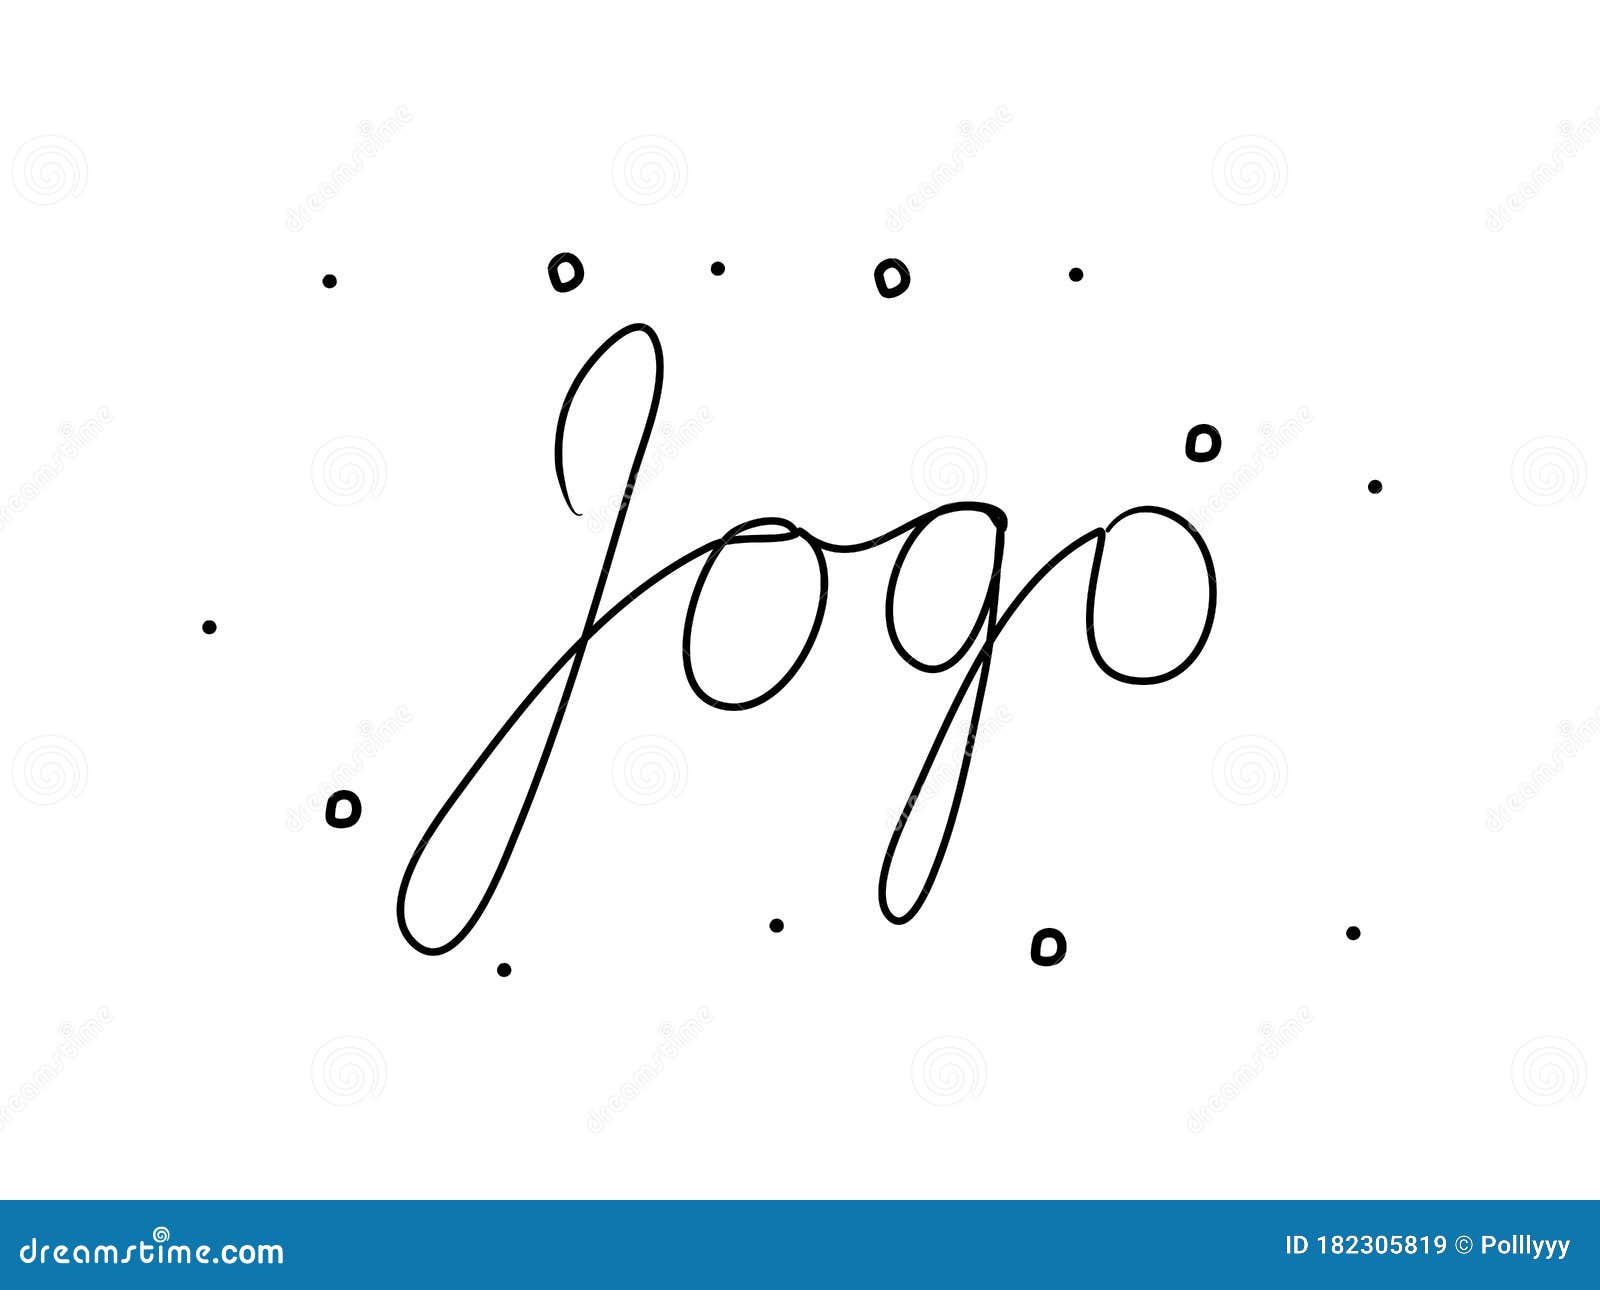 jogo phrase handwritten with a calligraphy brush. game in portuguese. modern brush calligraphy.  word black